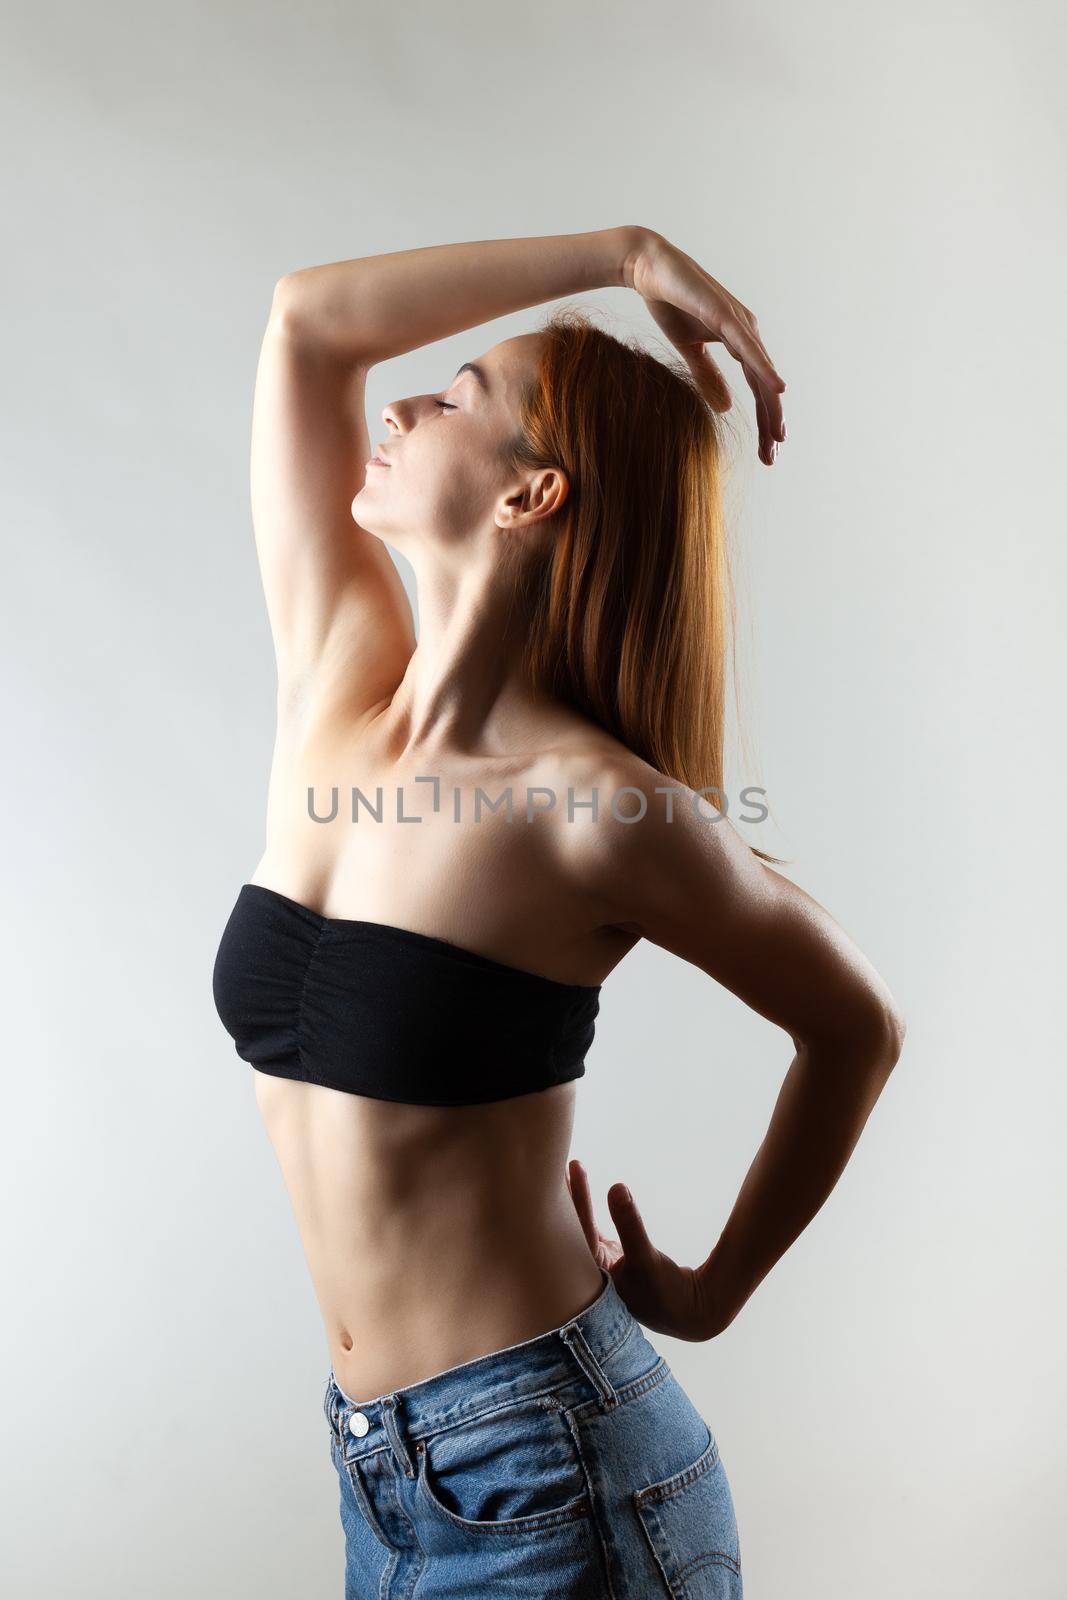 Beautiful girl with burnt orange hair stretching and making ballet pose. Studio portrait on gray background.. by kokimk